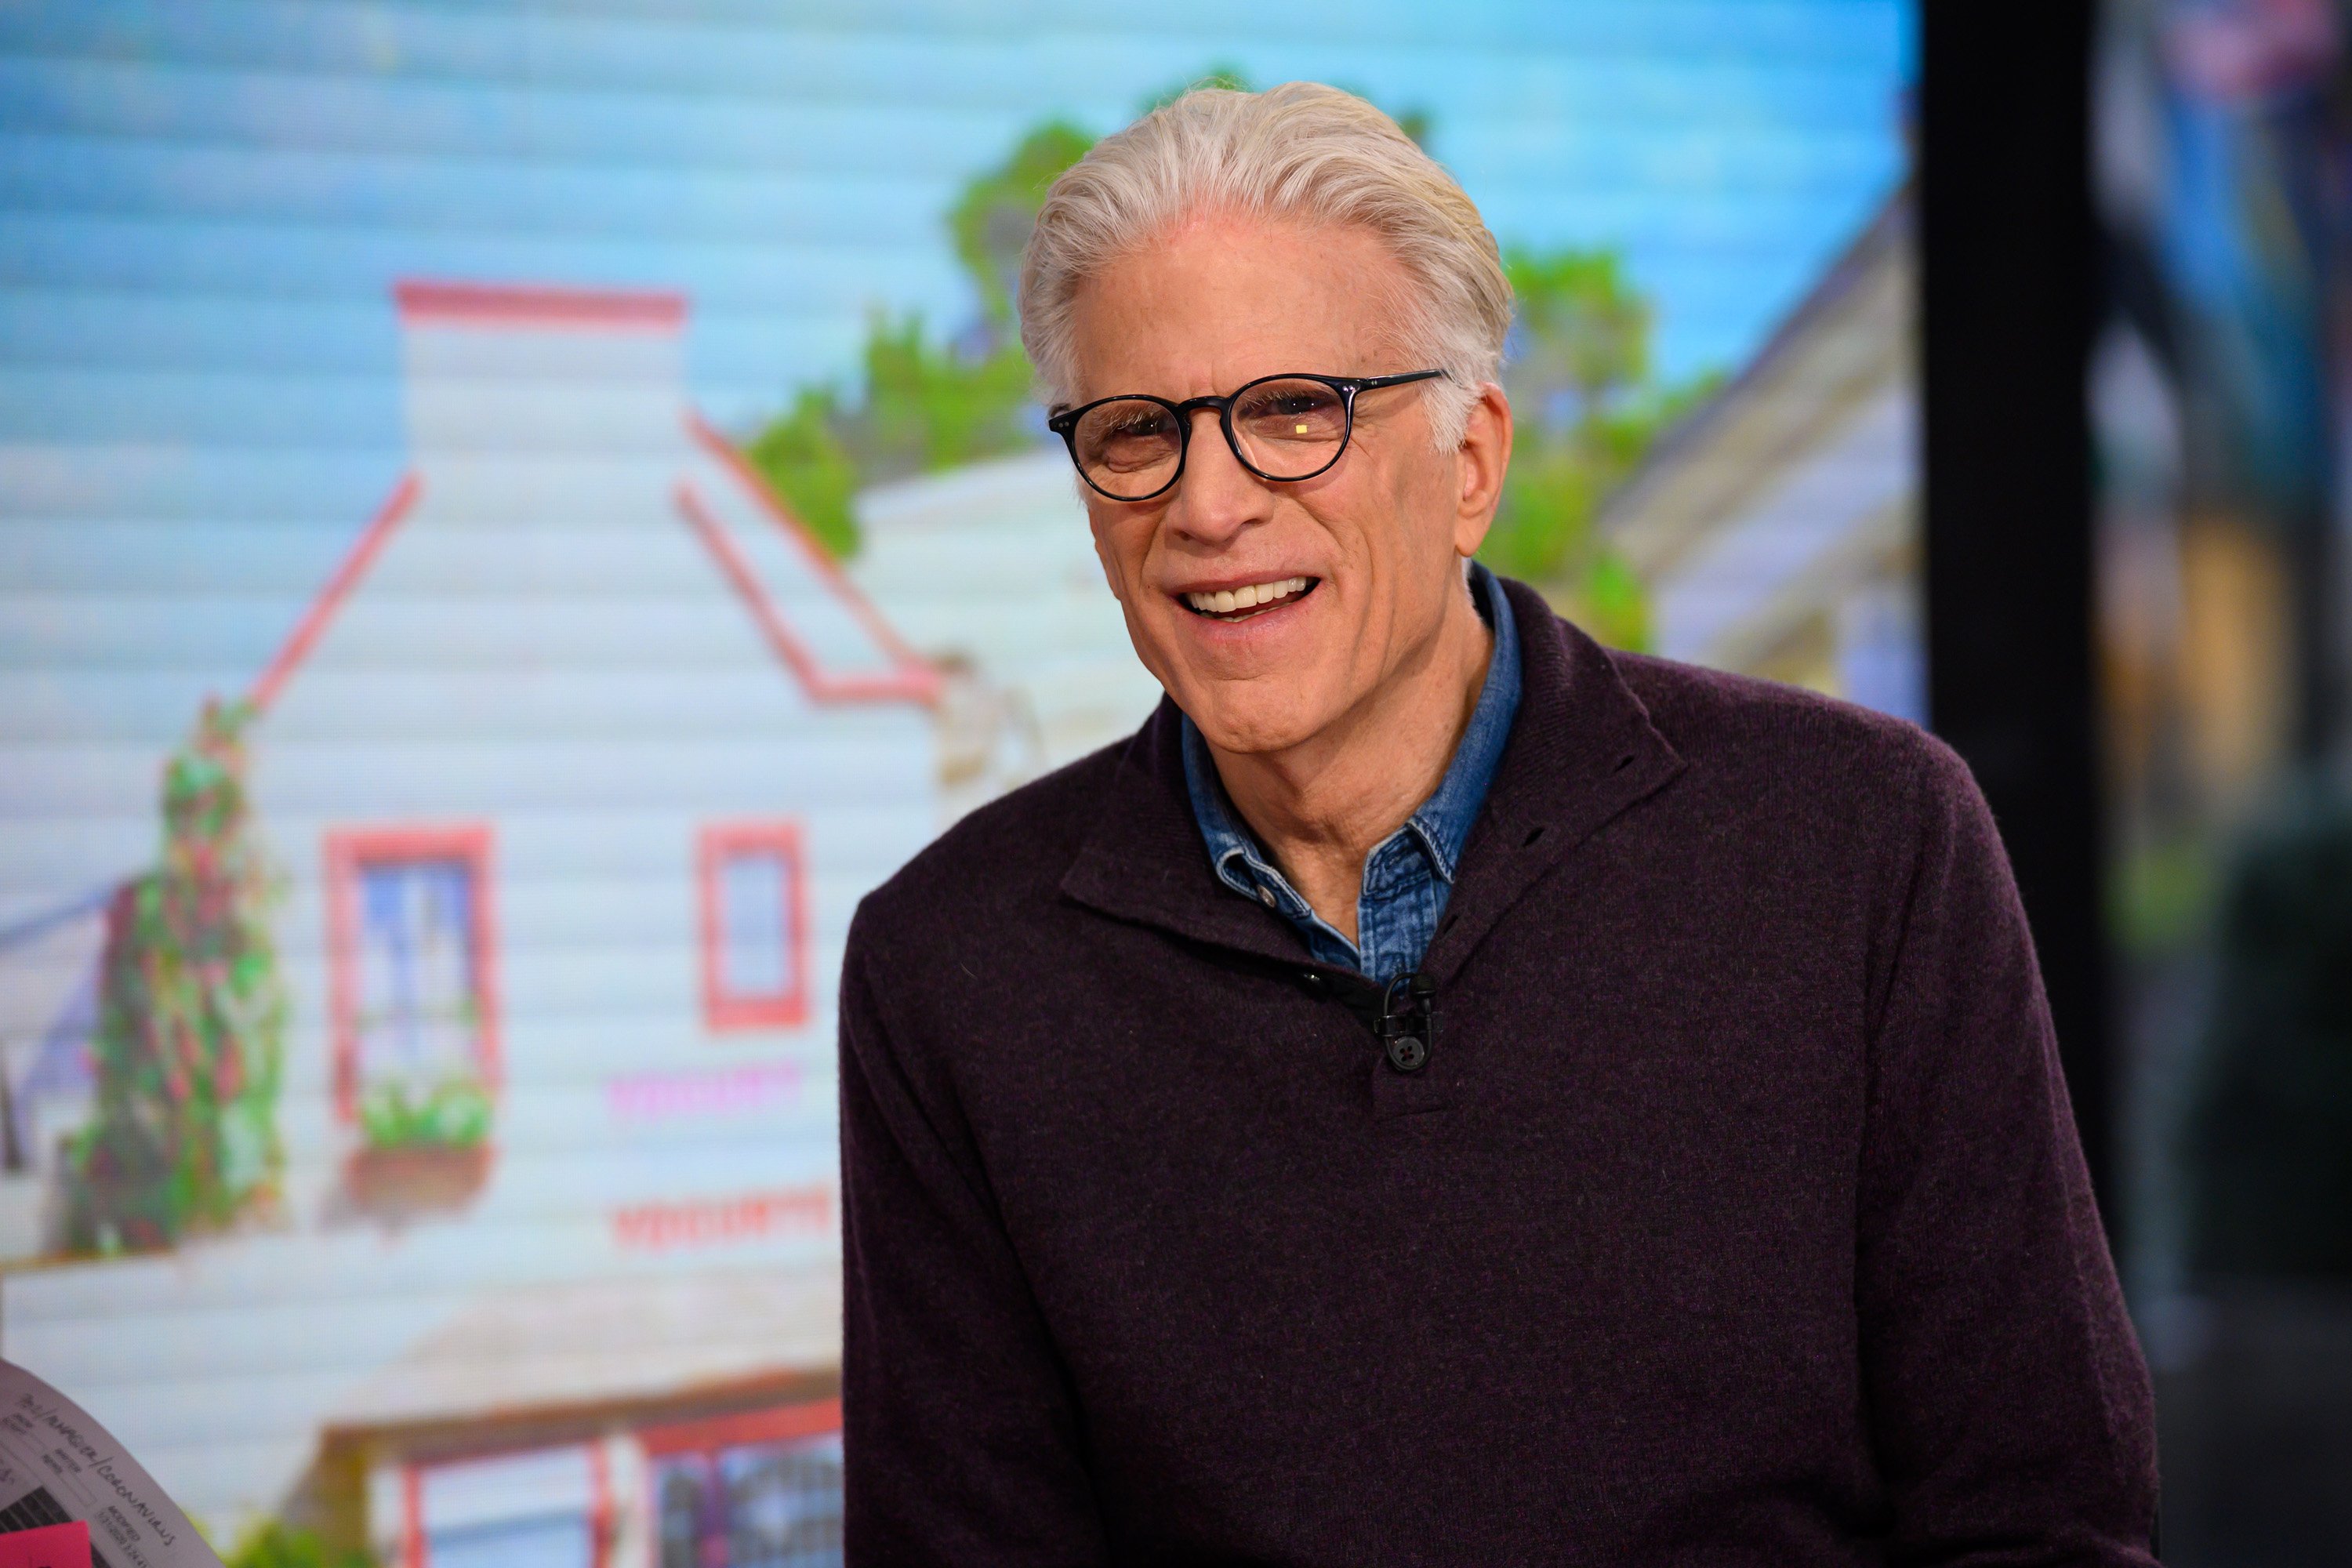 TV star Ted Danson during an appearance on the "TODAY" show Season 69 on January 31, 2020.┃Source: Getty Images